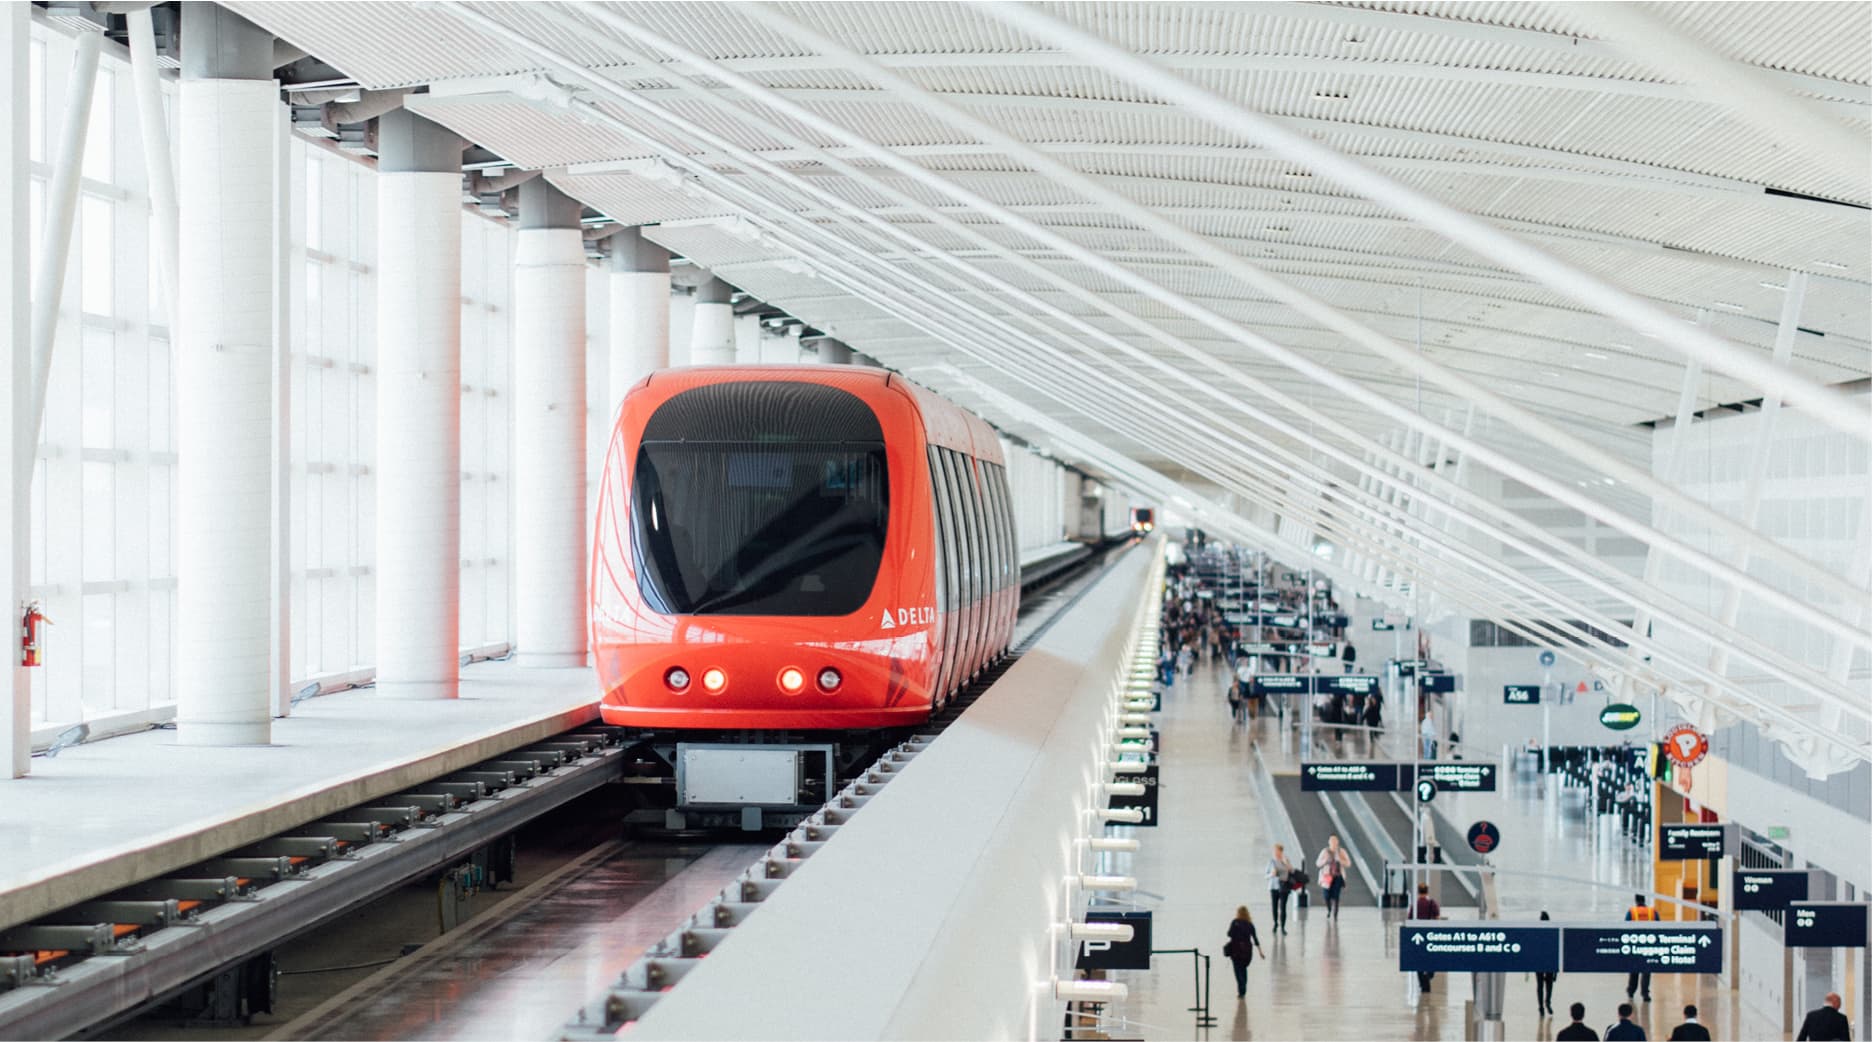 Supporting Germany’s development of sustainable public transport – Addleshaw Goddard advises Die Länderbahn on the financing of 41 new Siemens electric trains